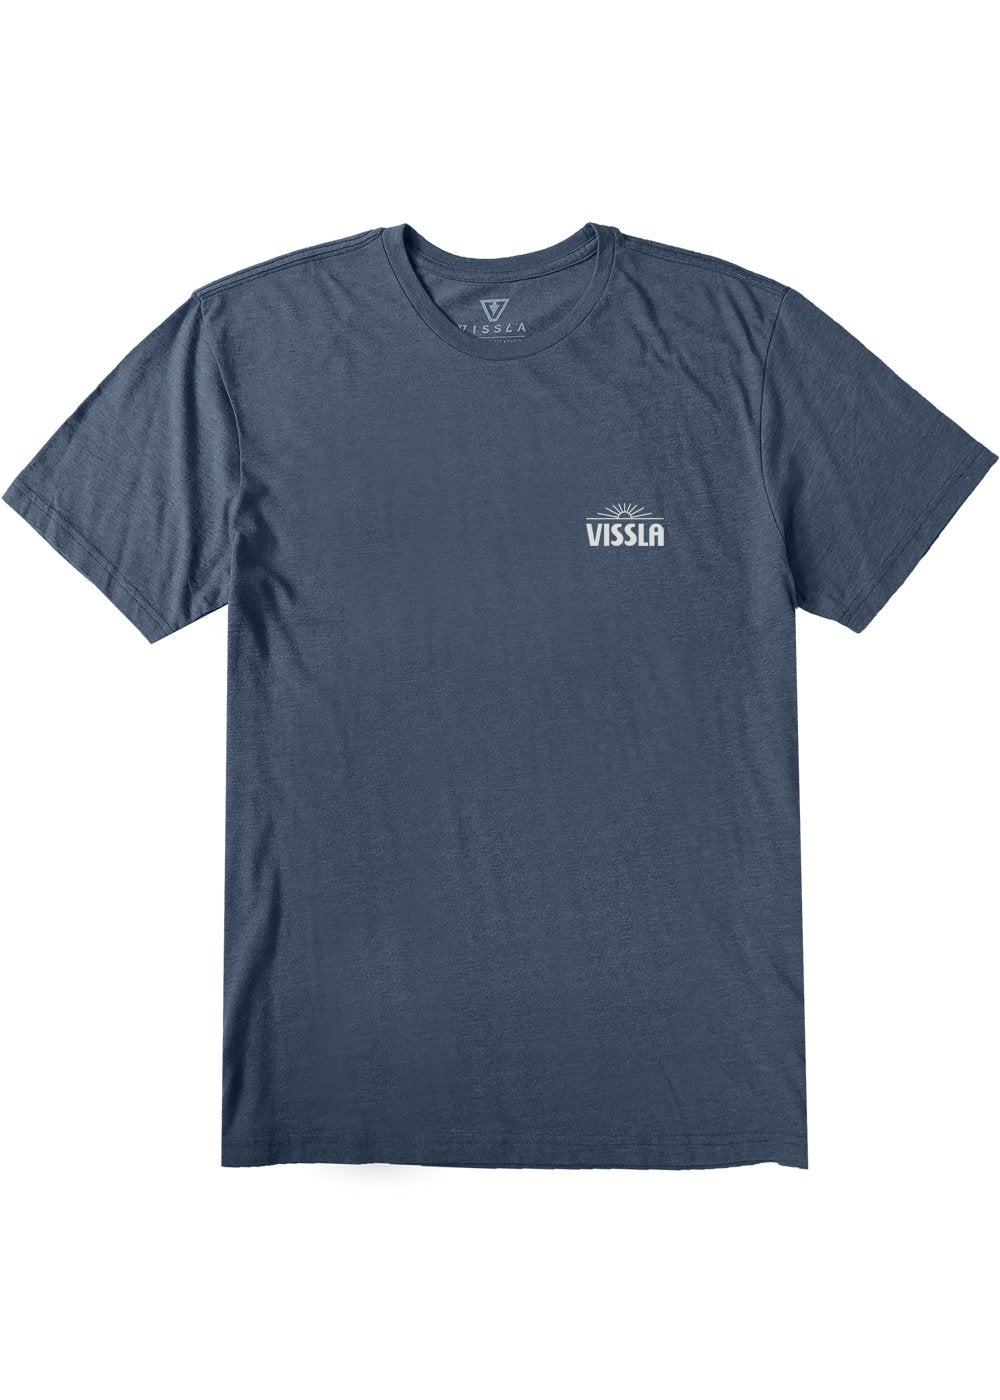 Vissla Quality Goods Heather Tee-MIH - Stoke Outlets